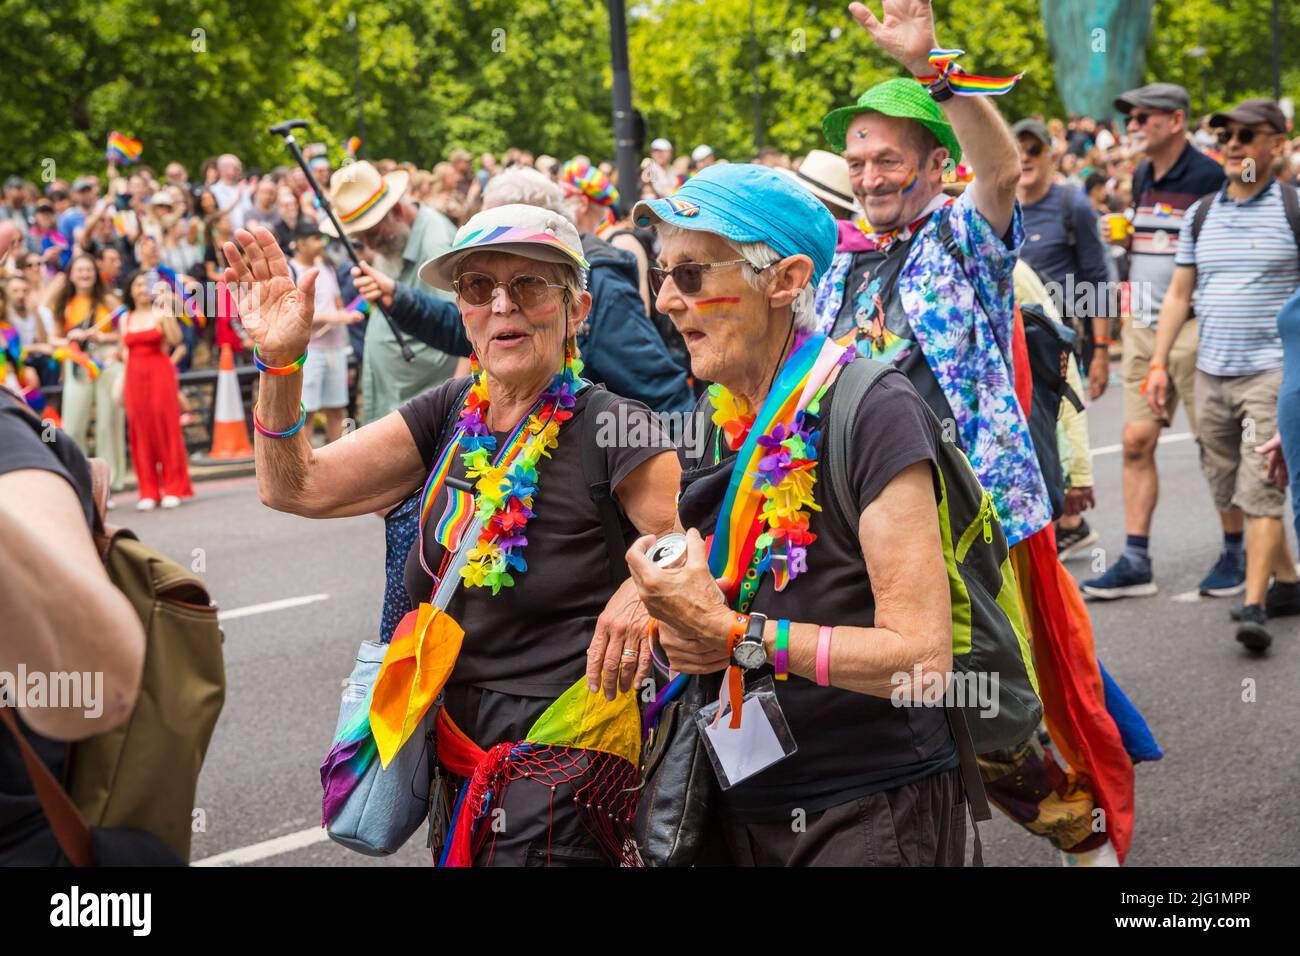 Couple of older lesbians taking part in Pride in London Stock Photo